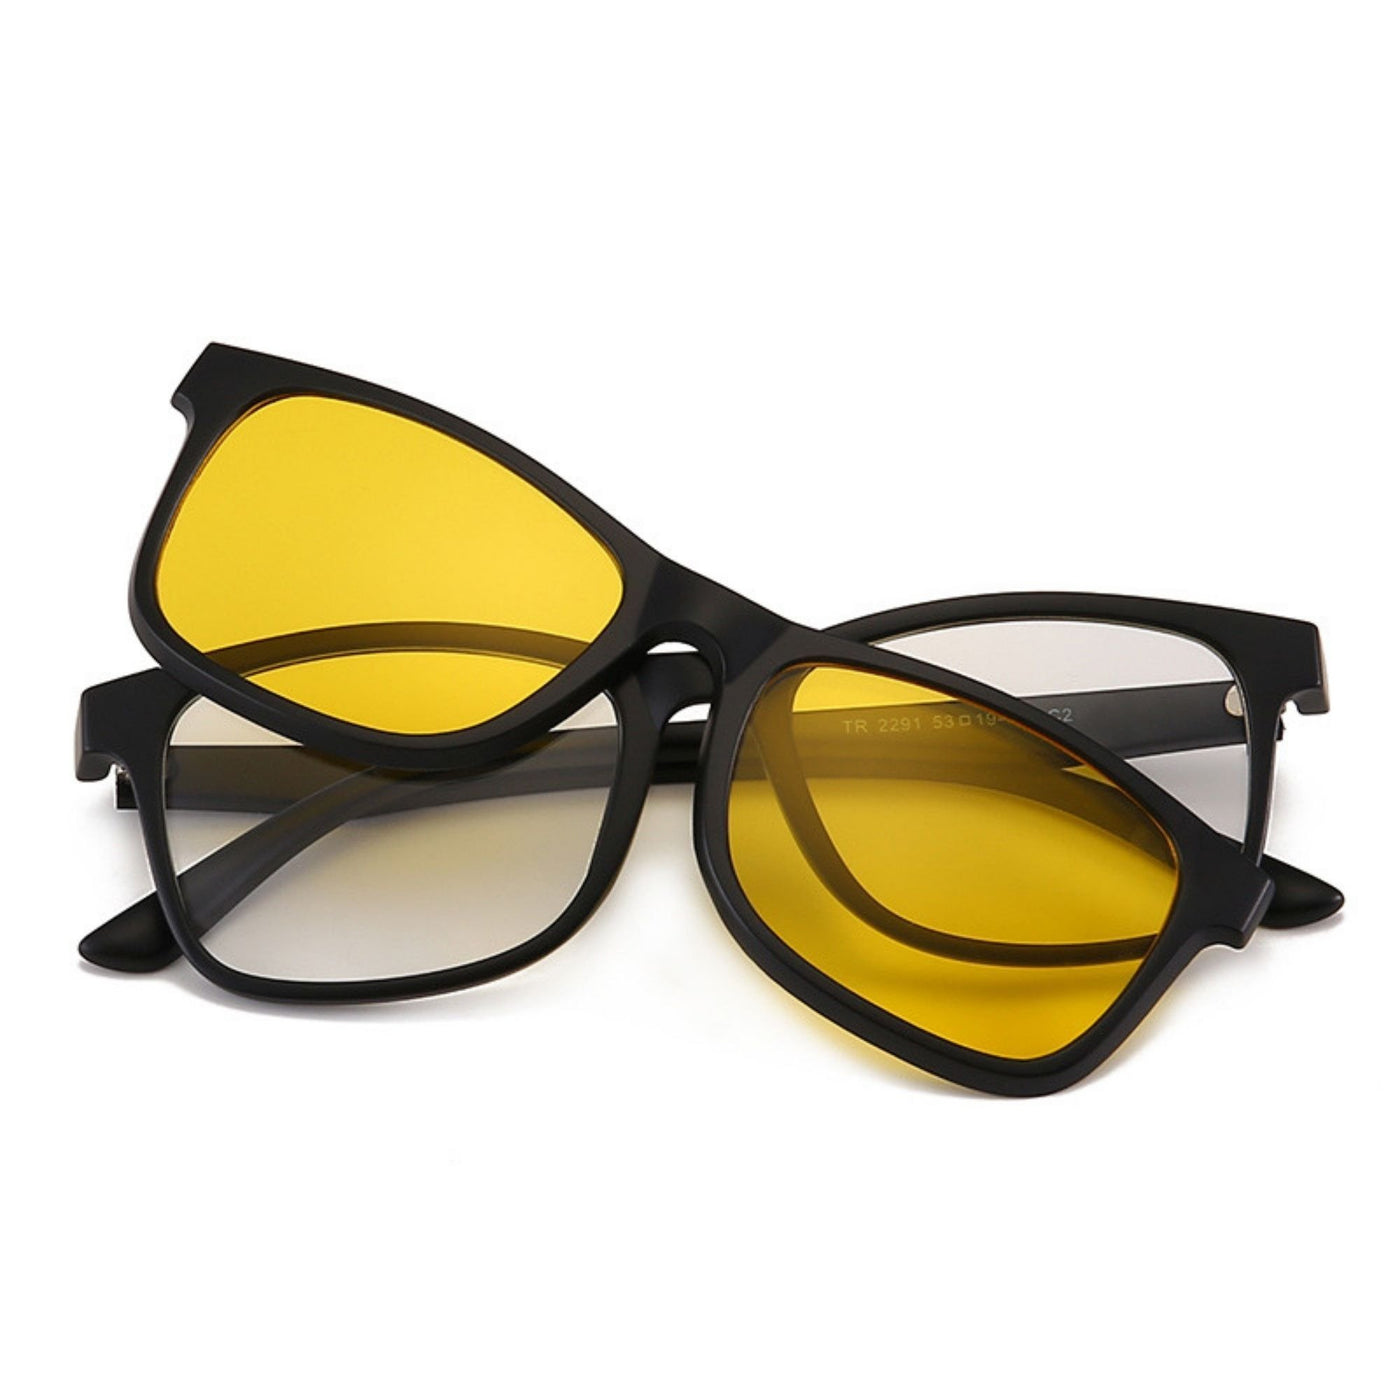 Classic Yardley Changeable Lens Eyewear For Men And Women-Unique and Classy